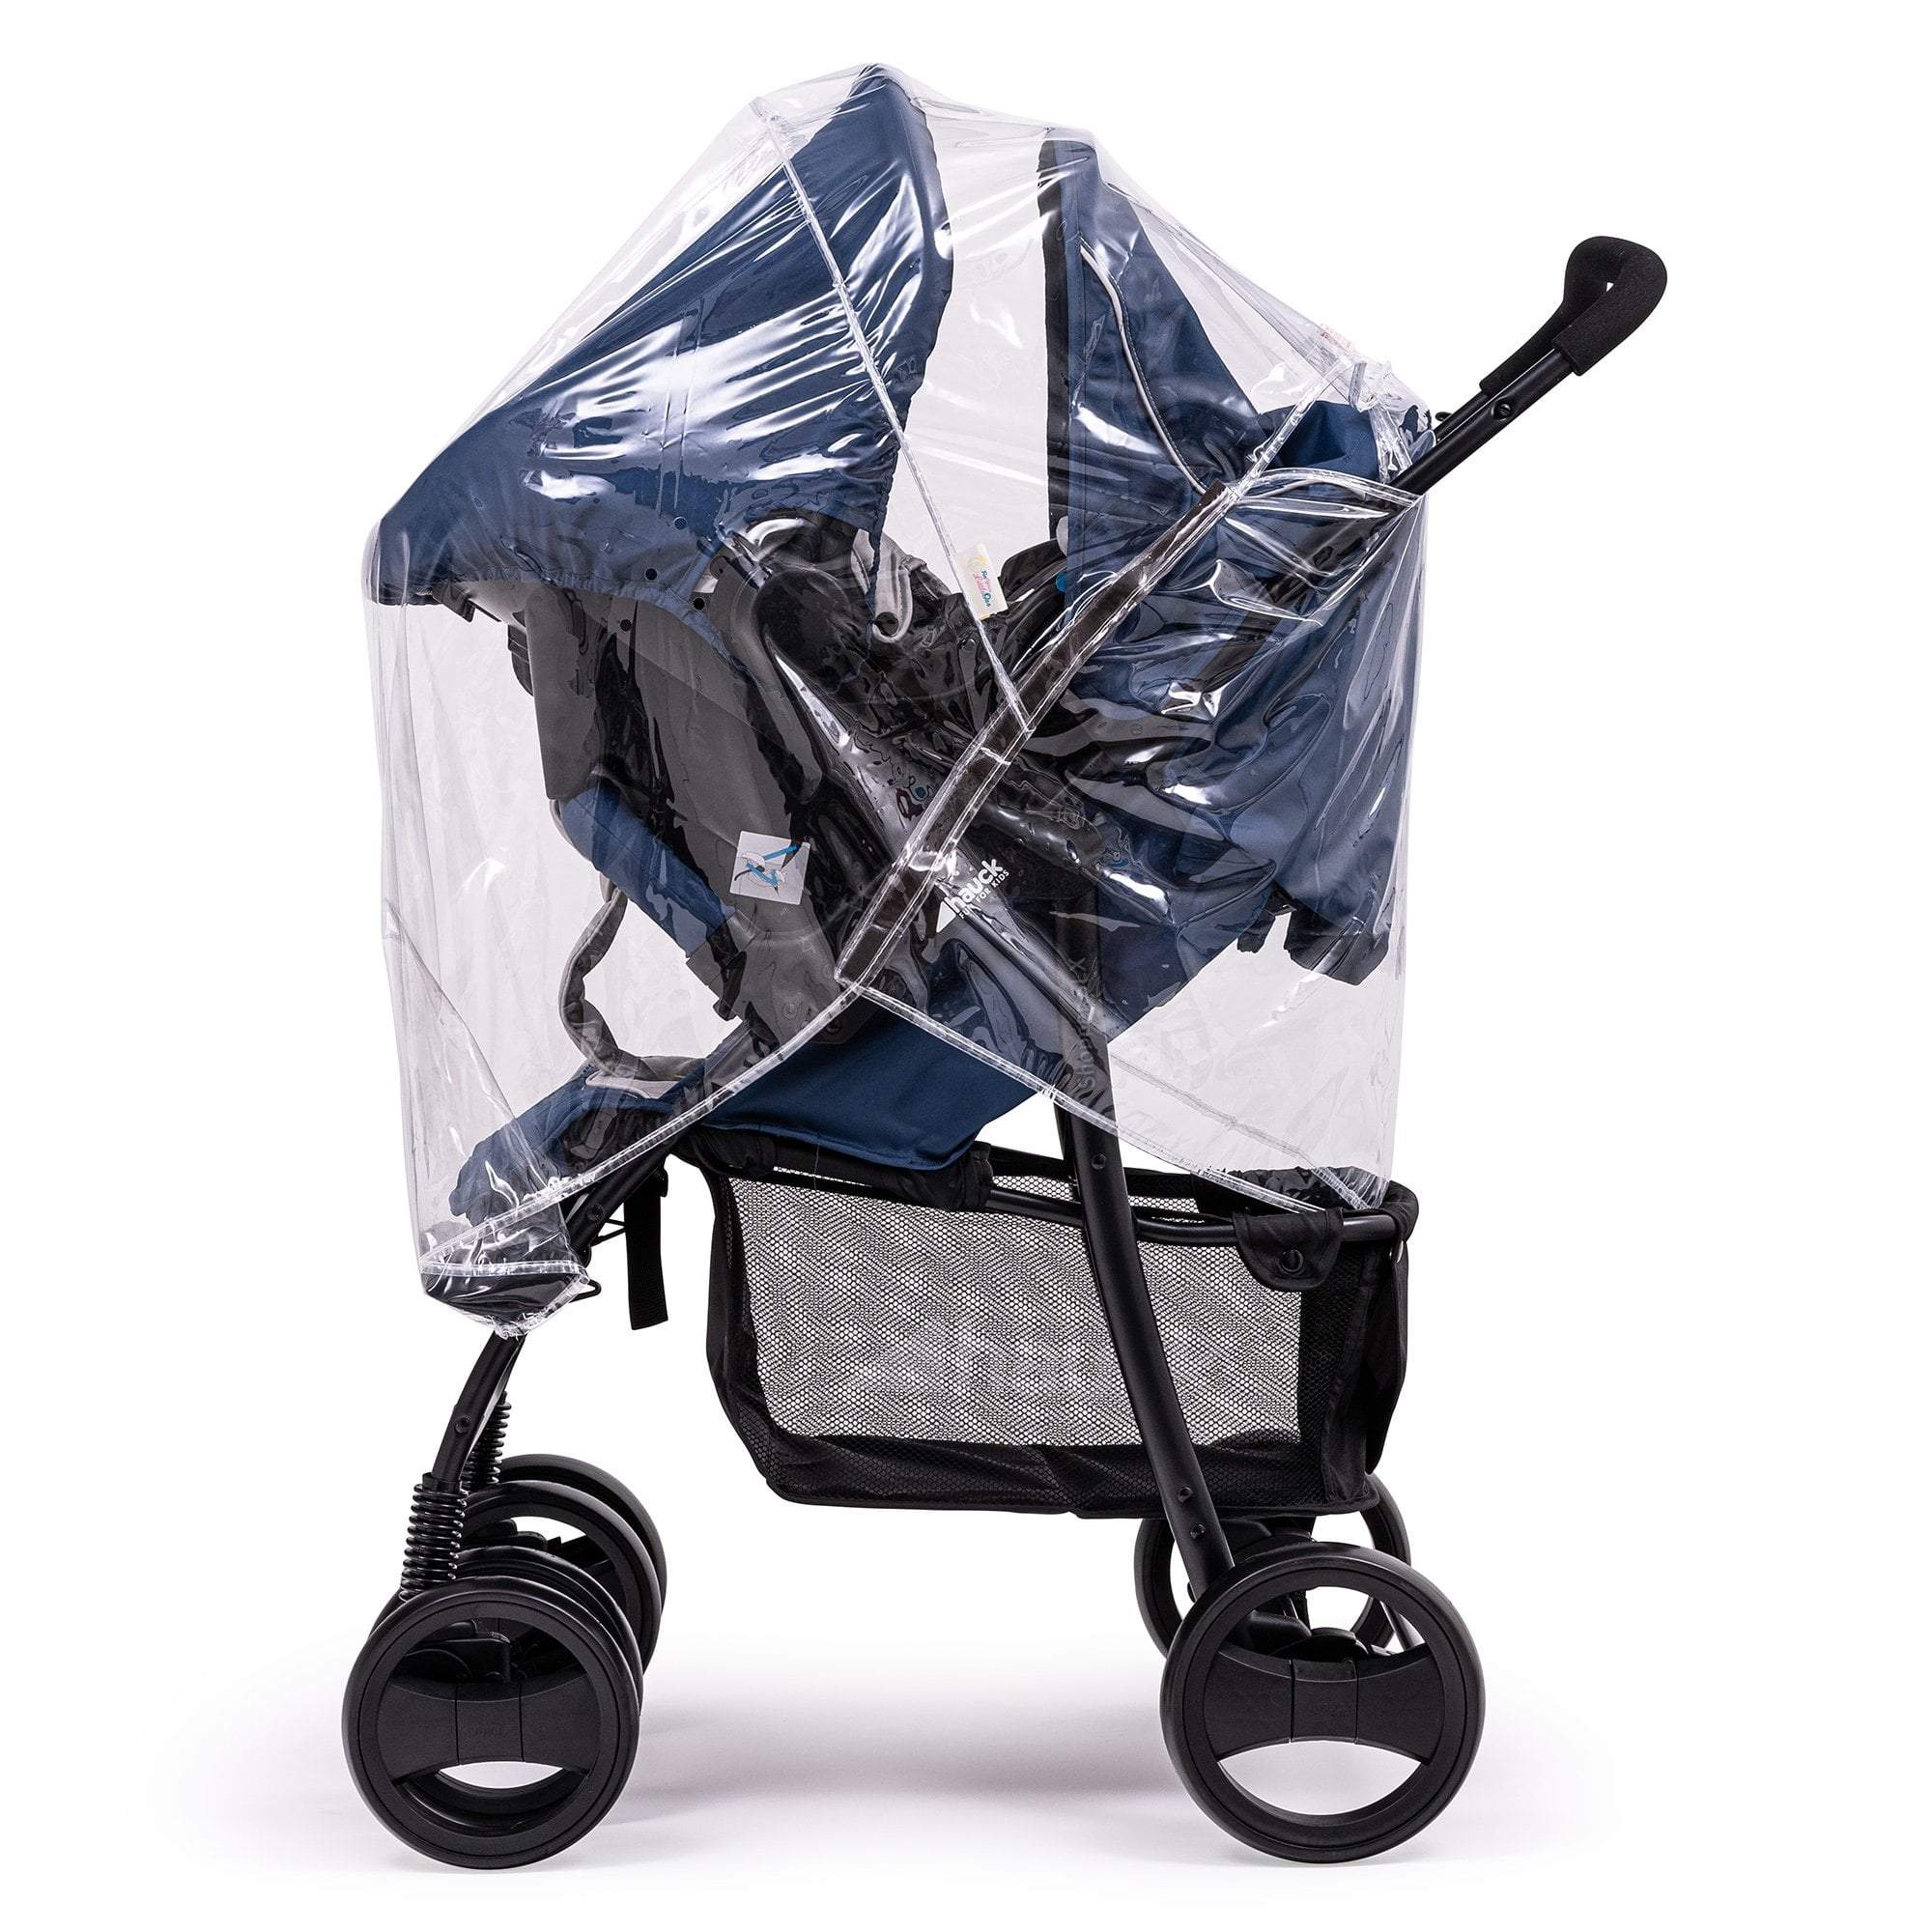 Travel System Raincover Compatible with Cosatto - Fits All Models - For Your Little One